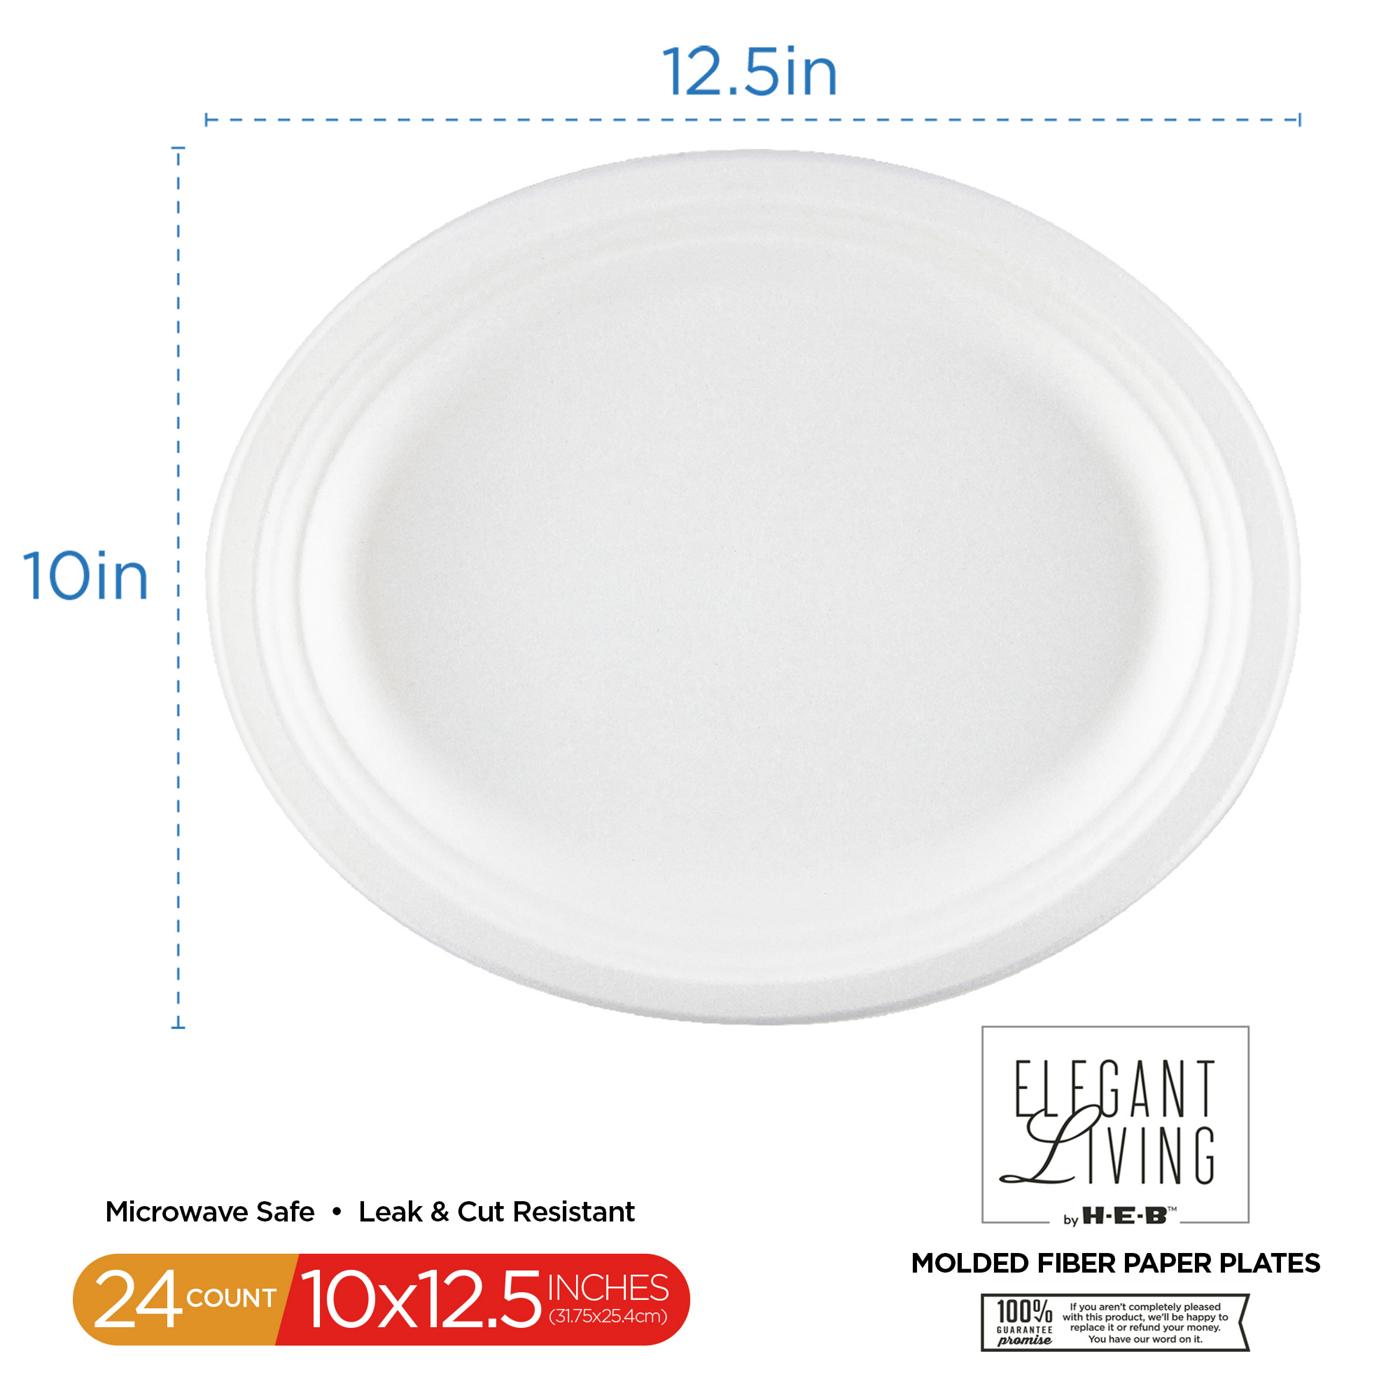 Elegant Living by H-E-B Oval Paper Platters; image 2 of 4